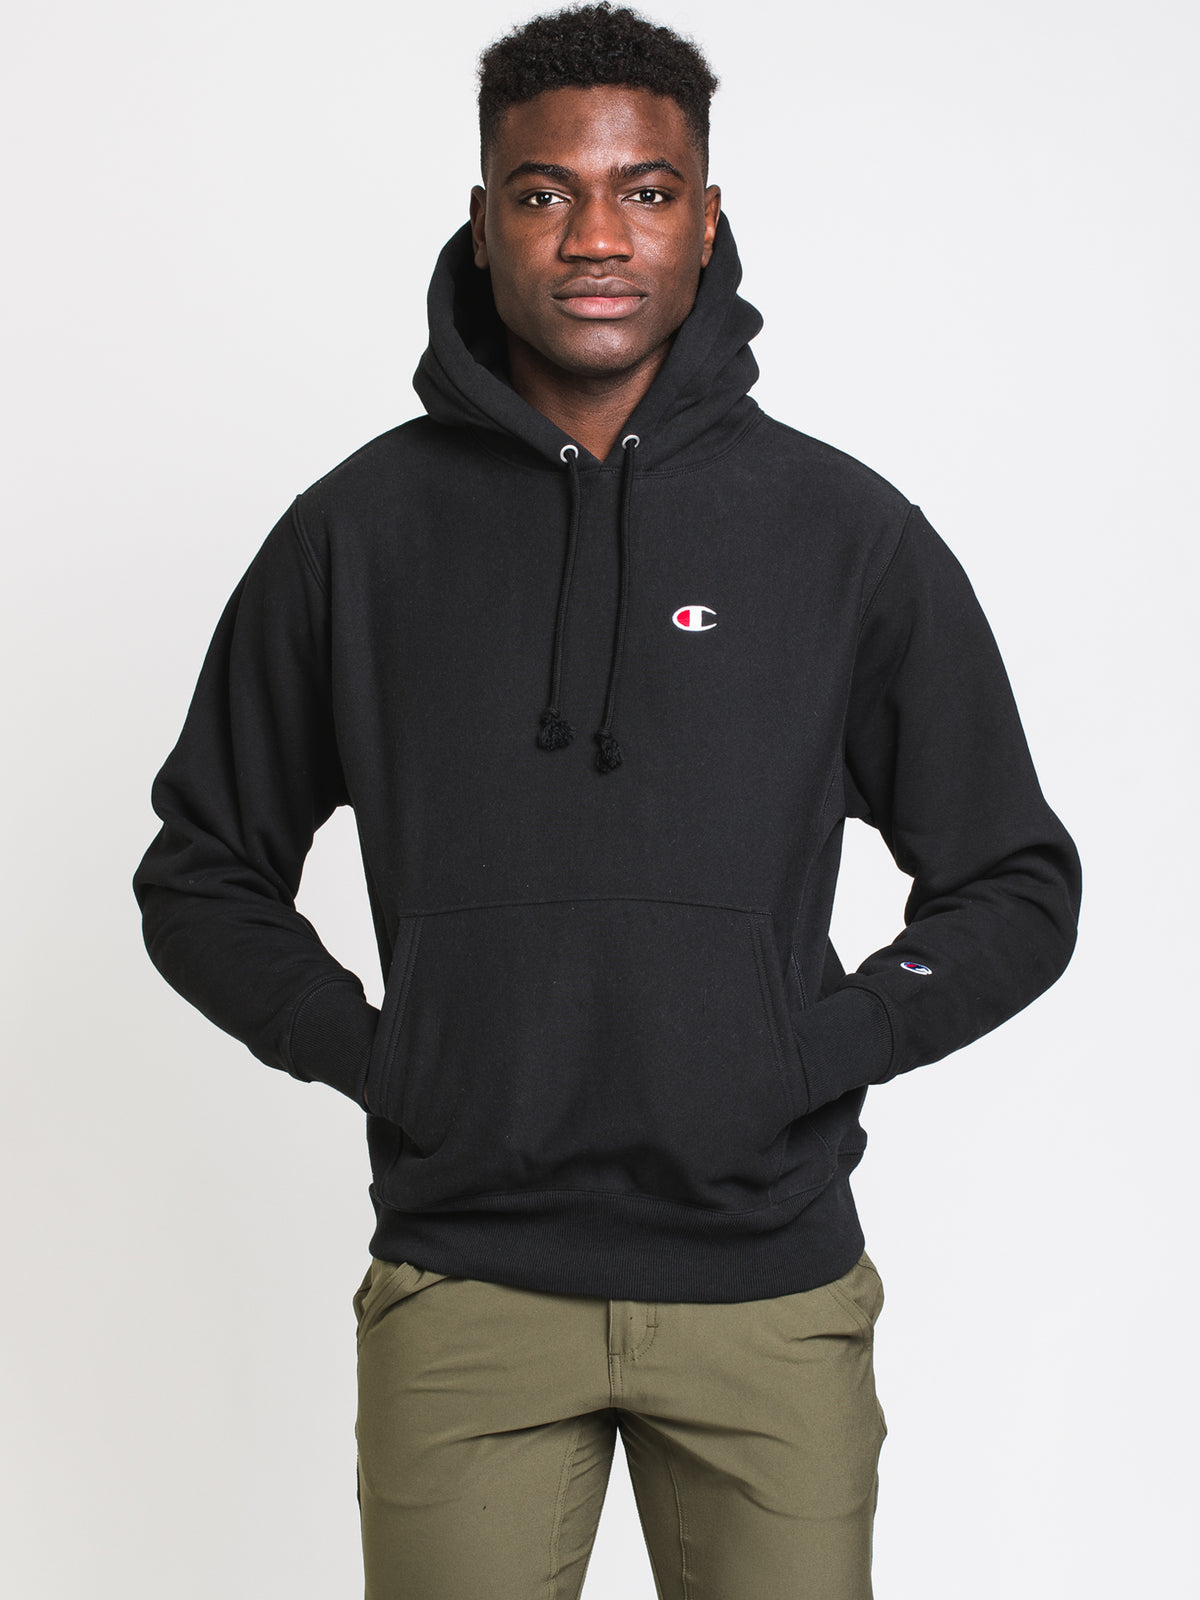 Men's Reverse Weave Pullover Hoodie from Champion